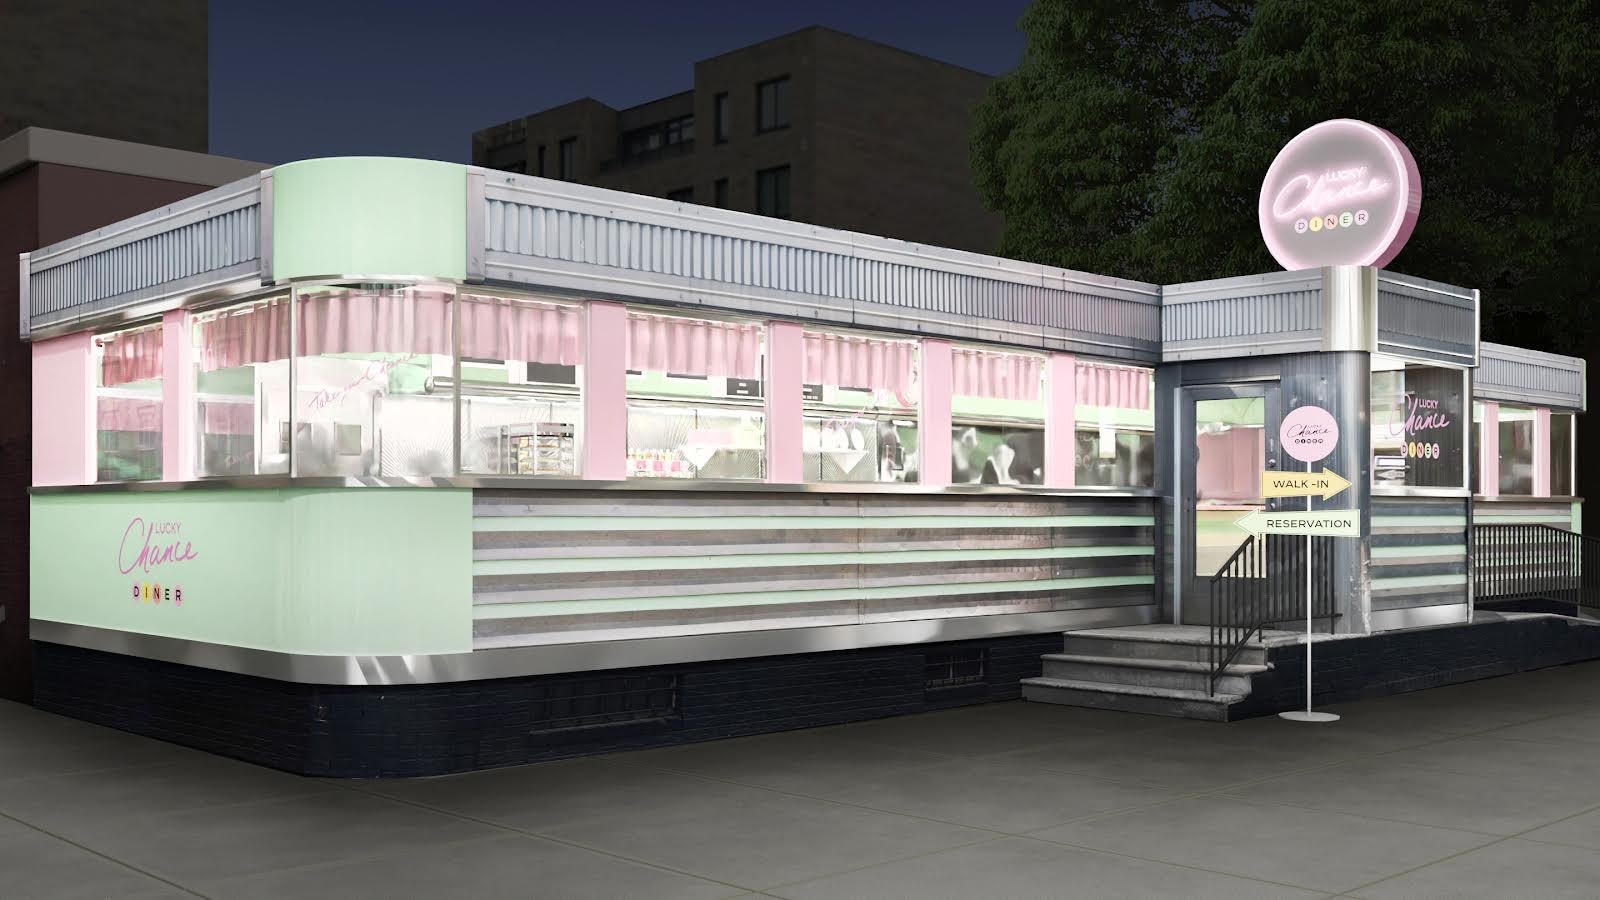 A Chanel vending machine and diner-inspired treats will be available